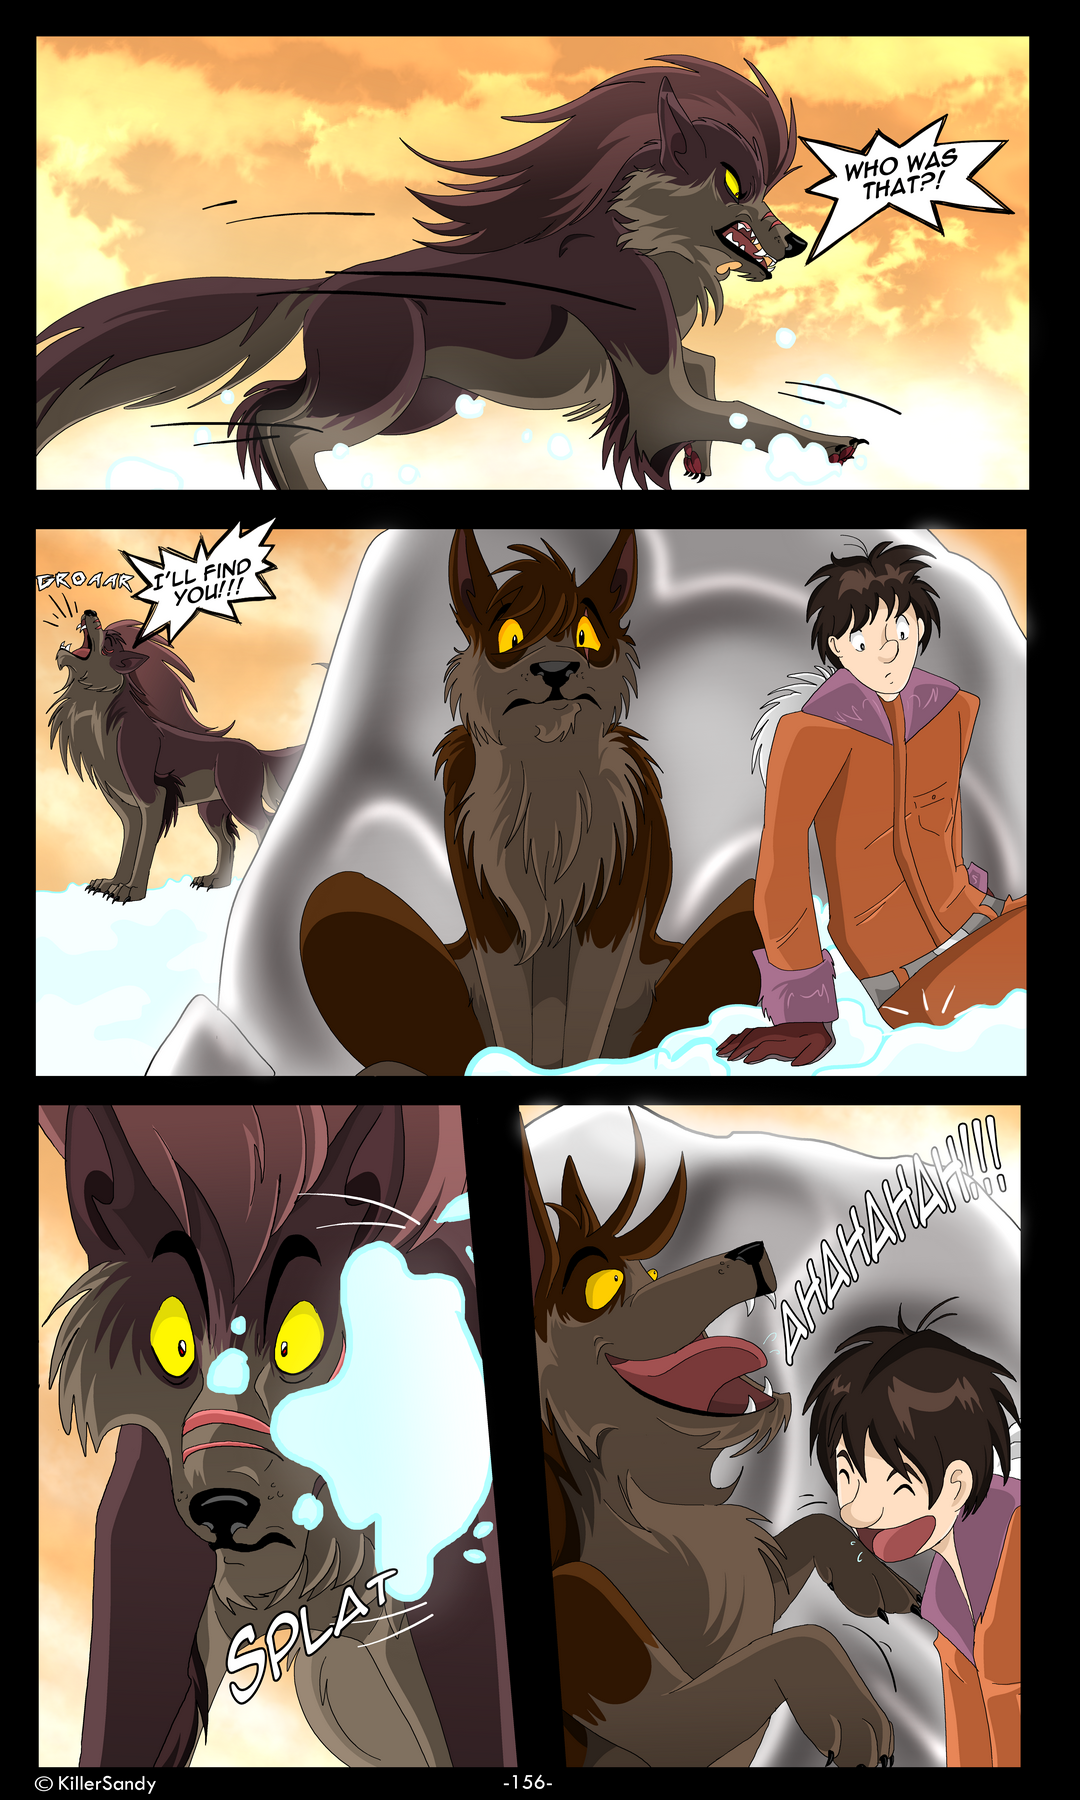 The Prince of the Moonlight Stone page 156